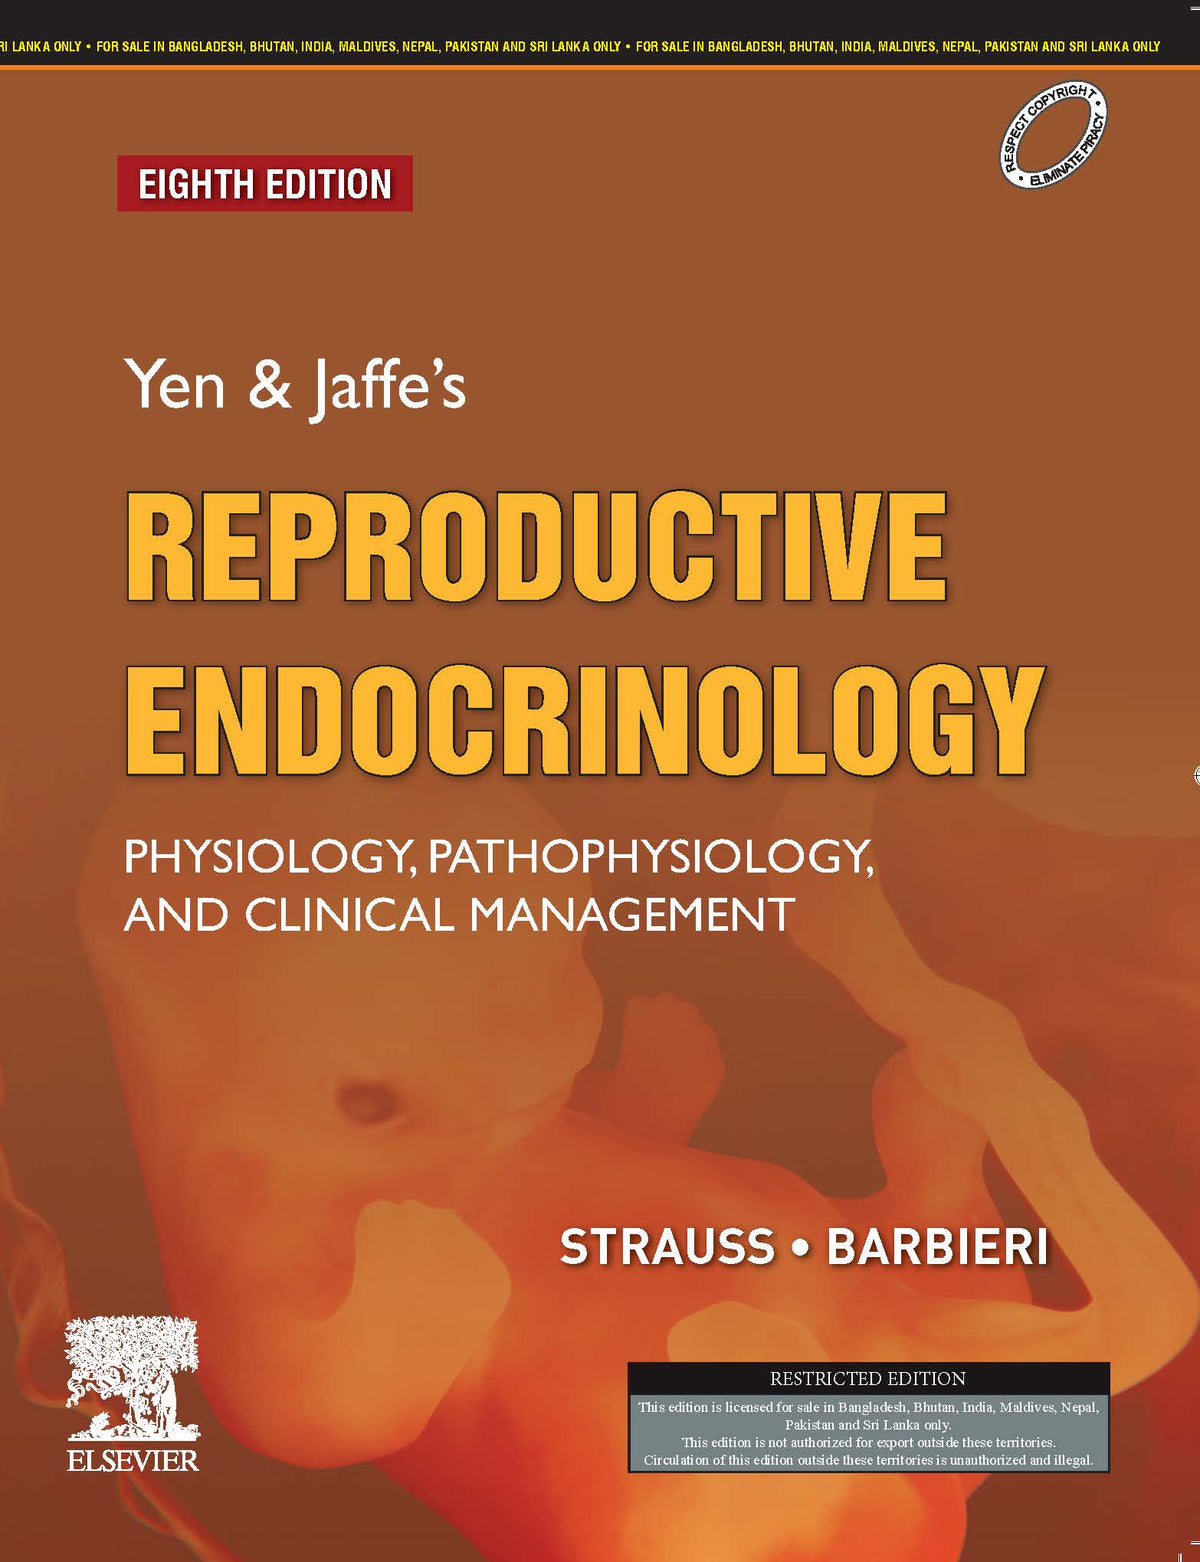 Yen & Jaffe's Reproductive Endocrinology : Physiology, Pathophysiology, and Clinical Management, 8e by Strauss